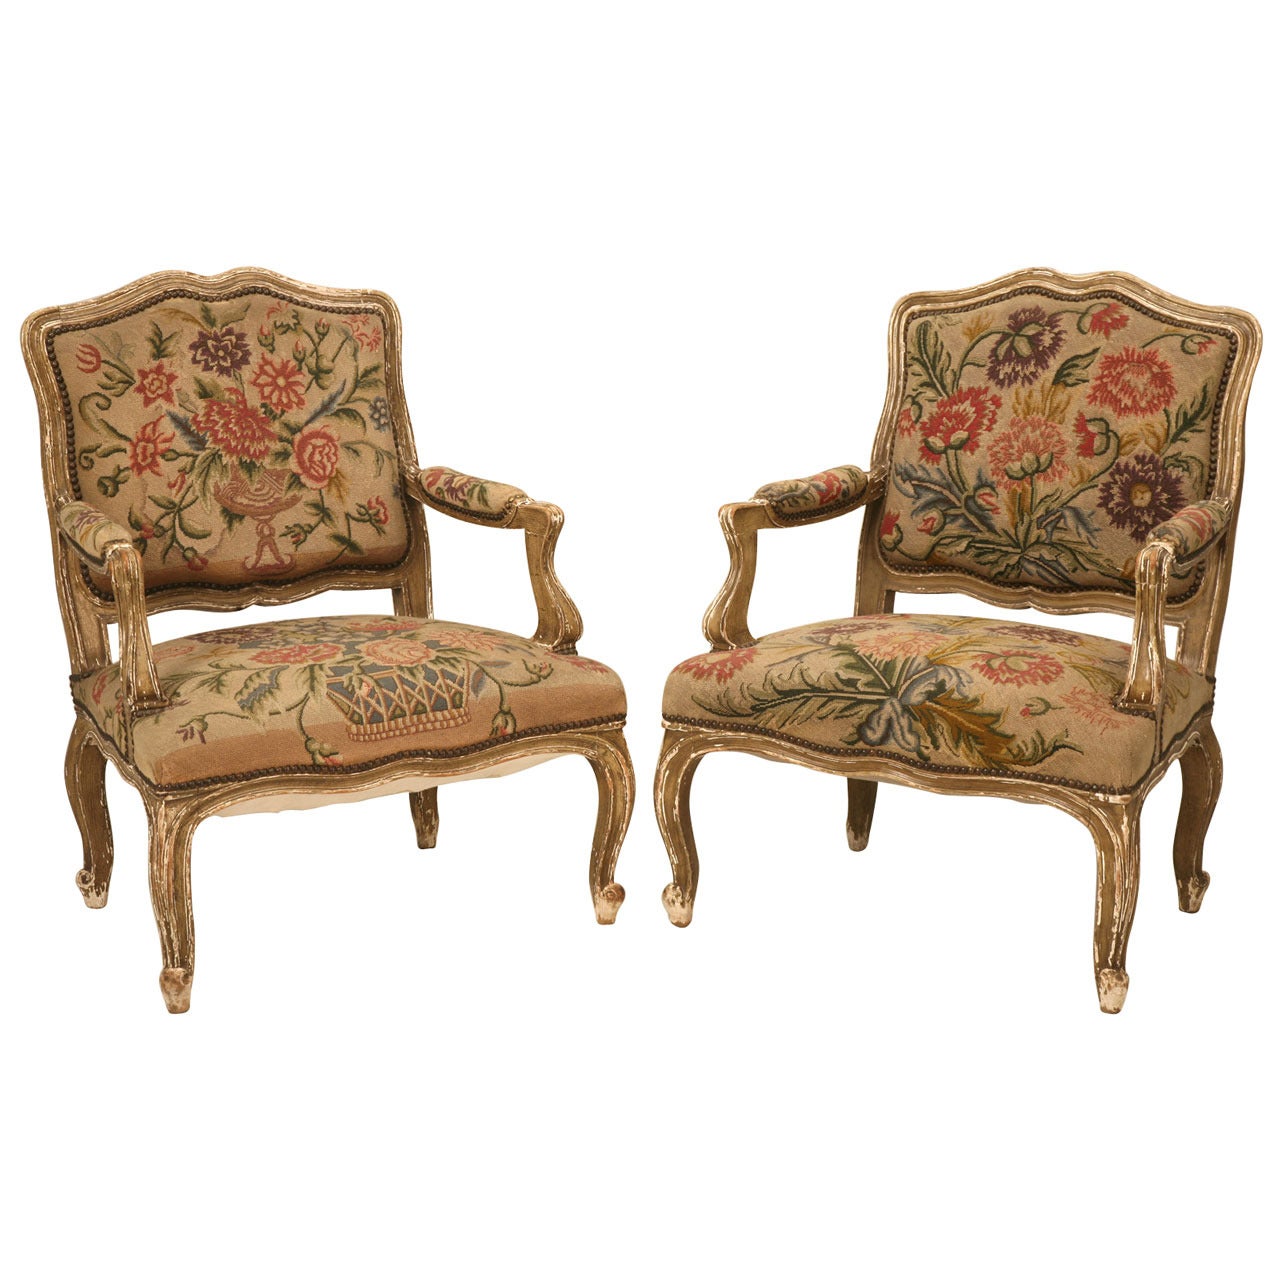 Wide Pair of Original Paint Antique Italian Armchairs with Needlepoint